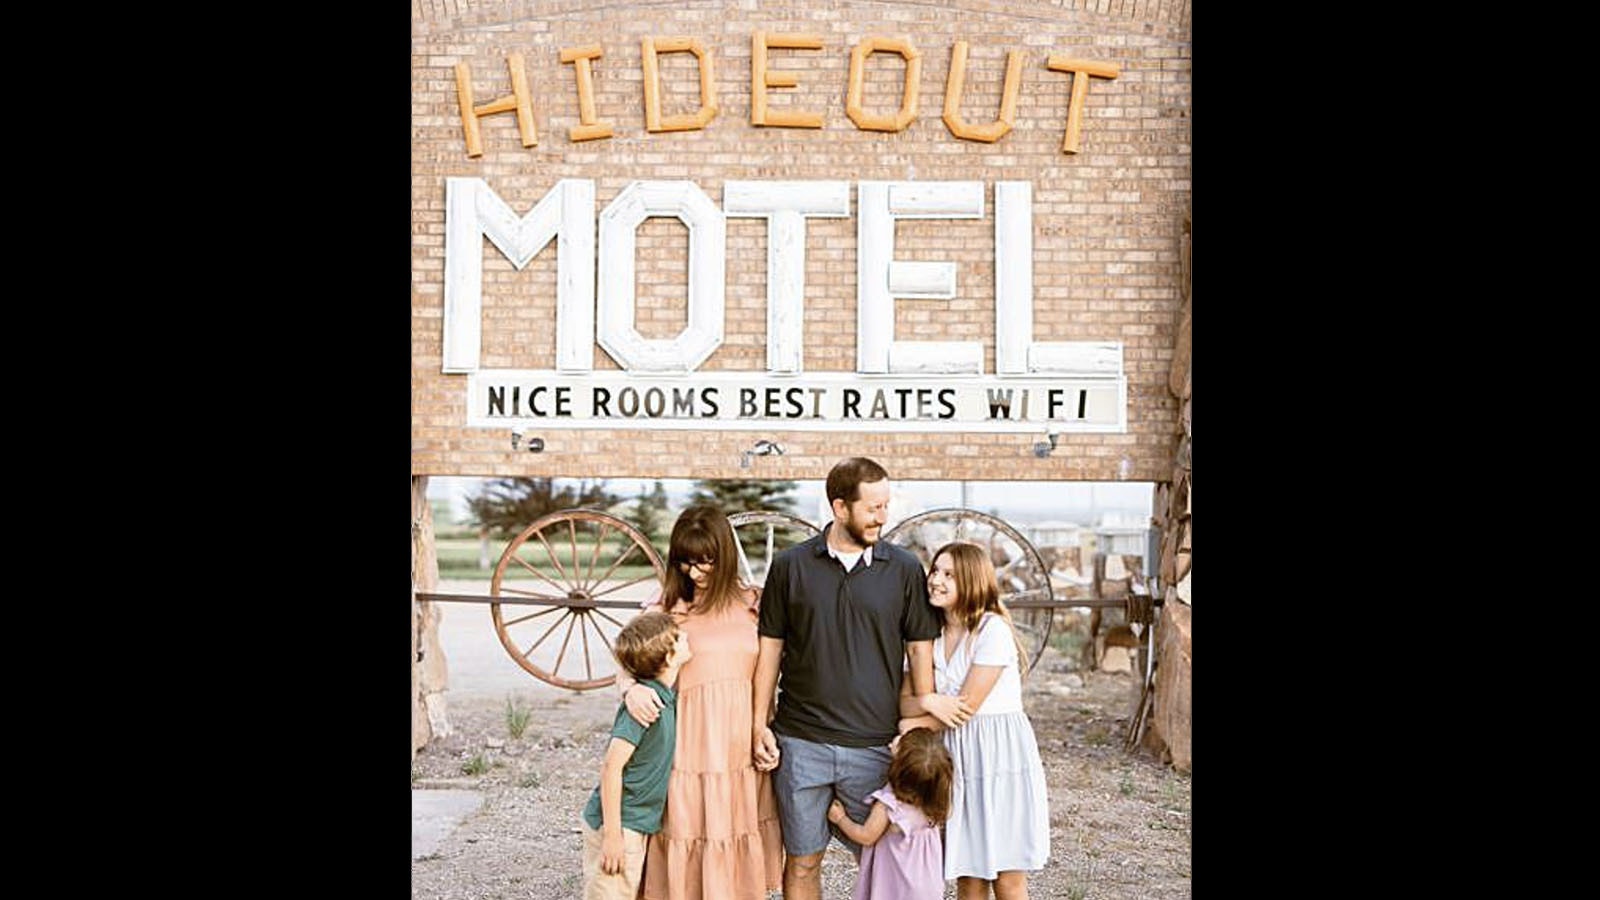 The Reids bought the Hideout Motel in Cokeville after relocating from Seattle.